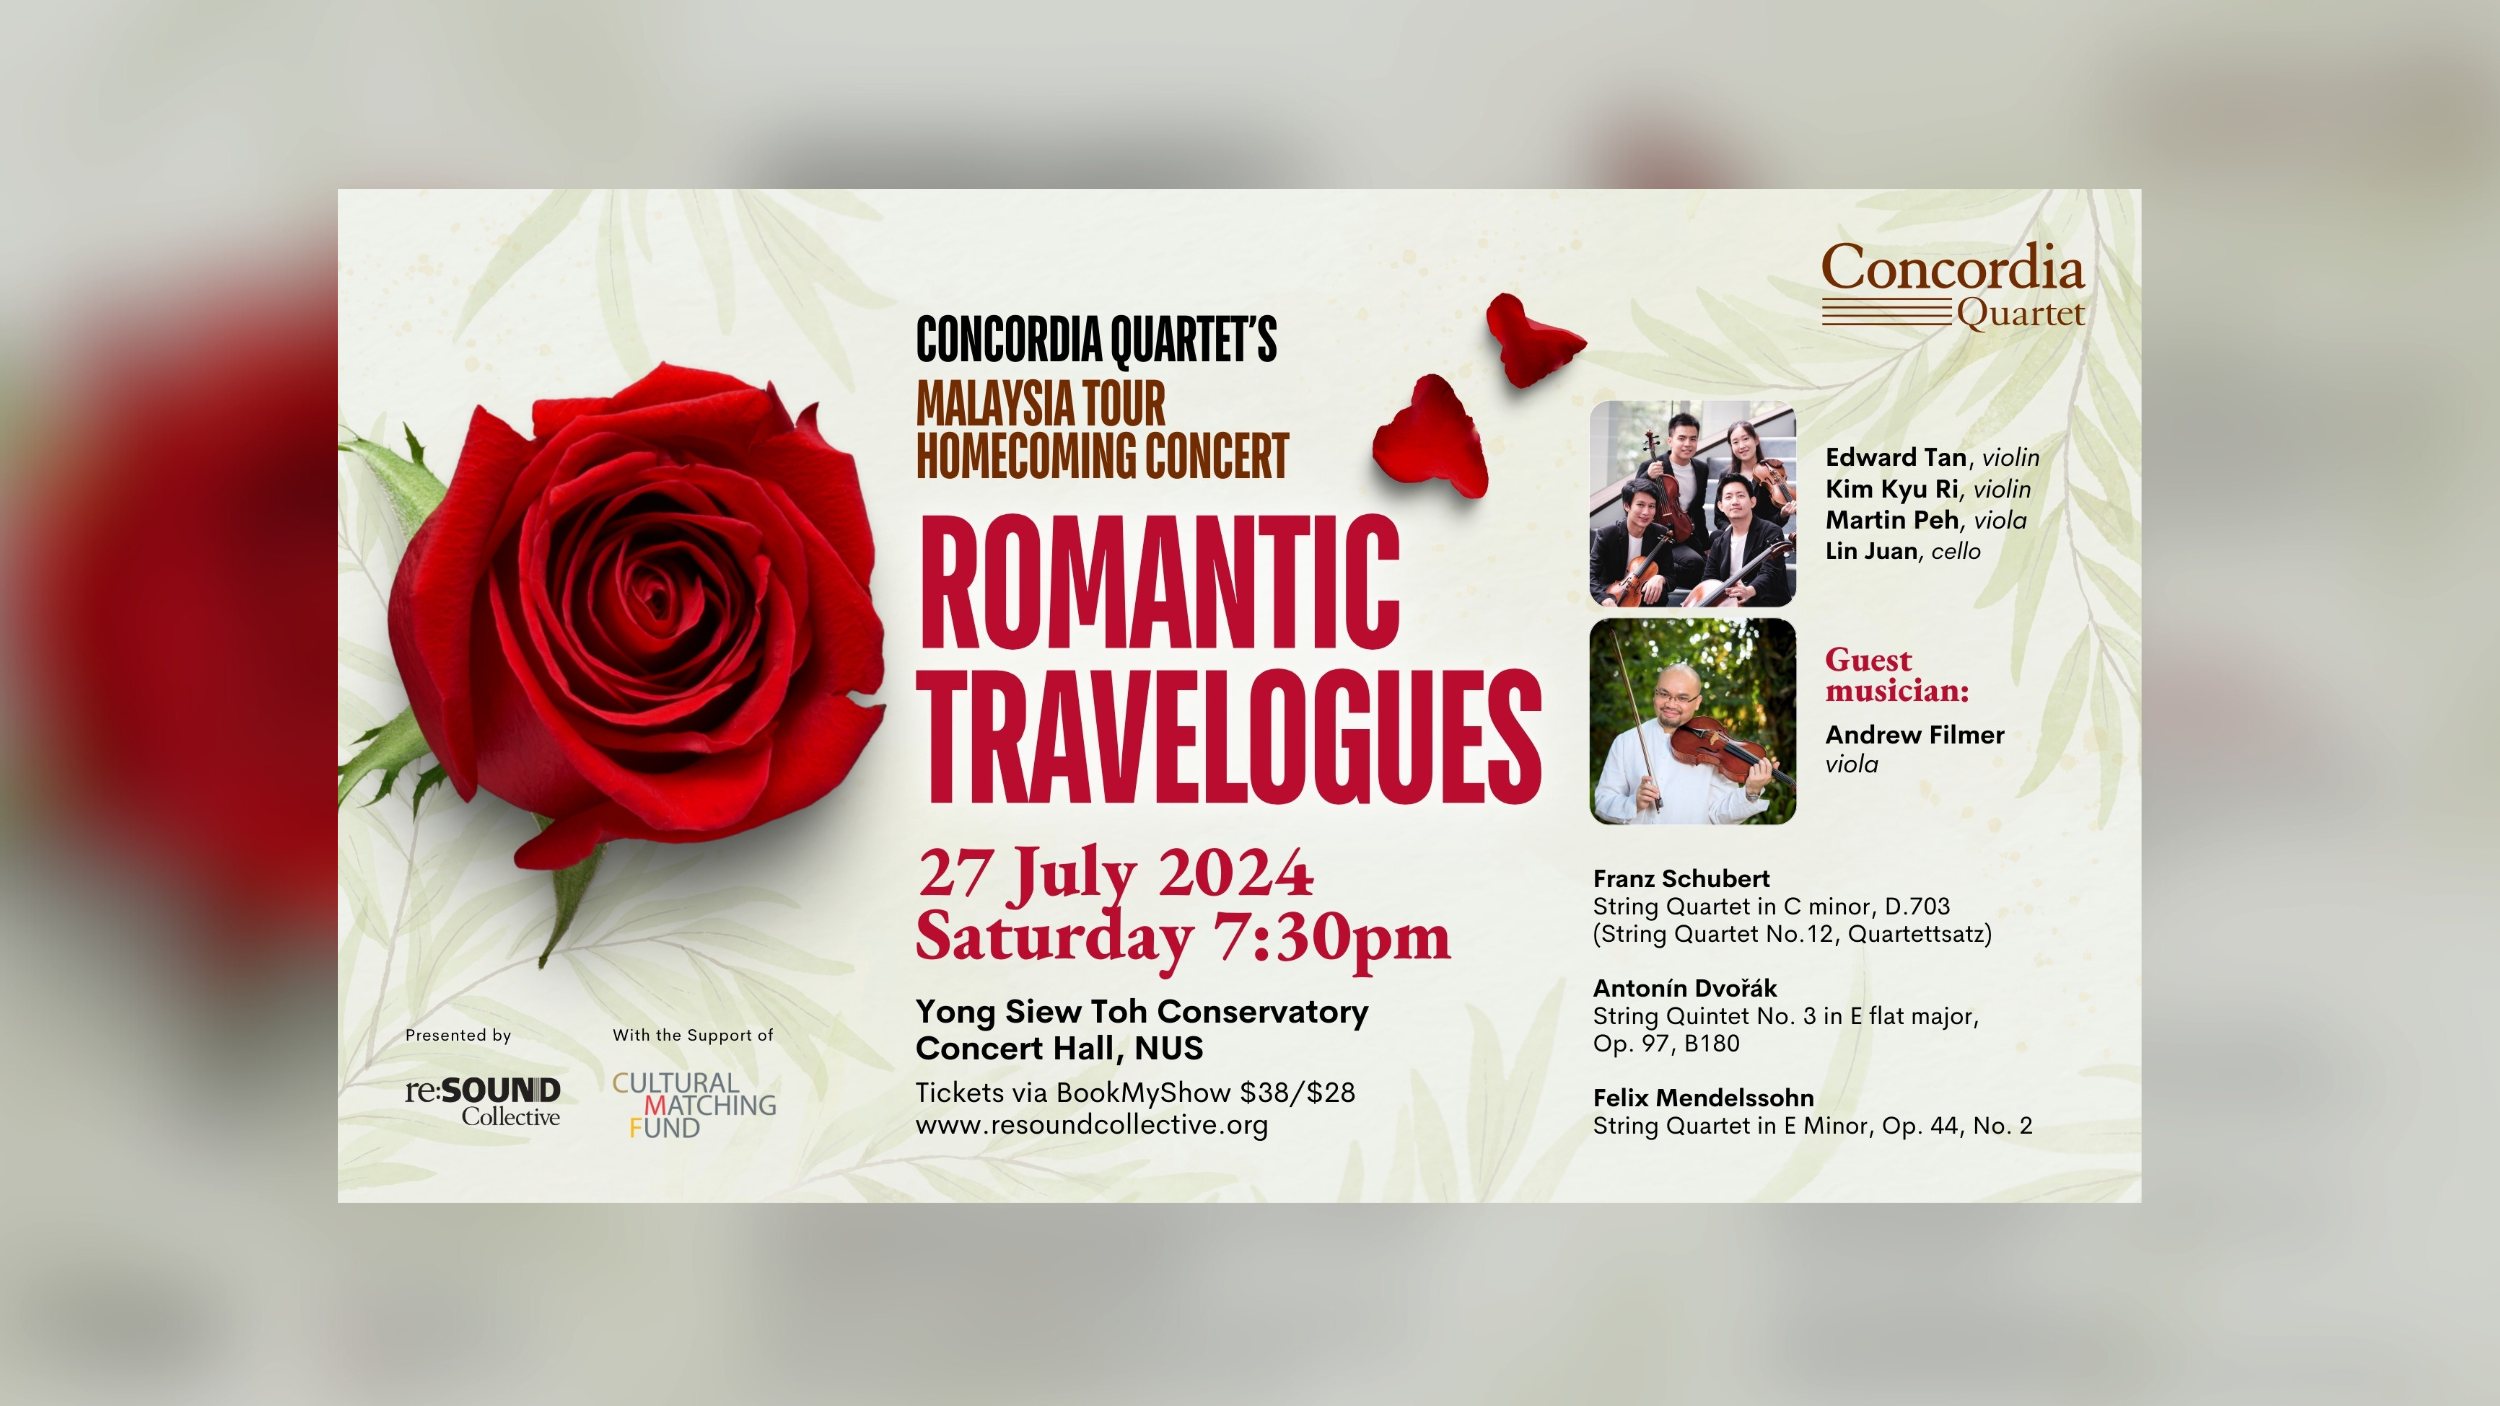 Romantic Travelogues - Concordia Quartet’s Malaysia Tour Homecoming Concert | 27 July 2024 at YST Concert Hall